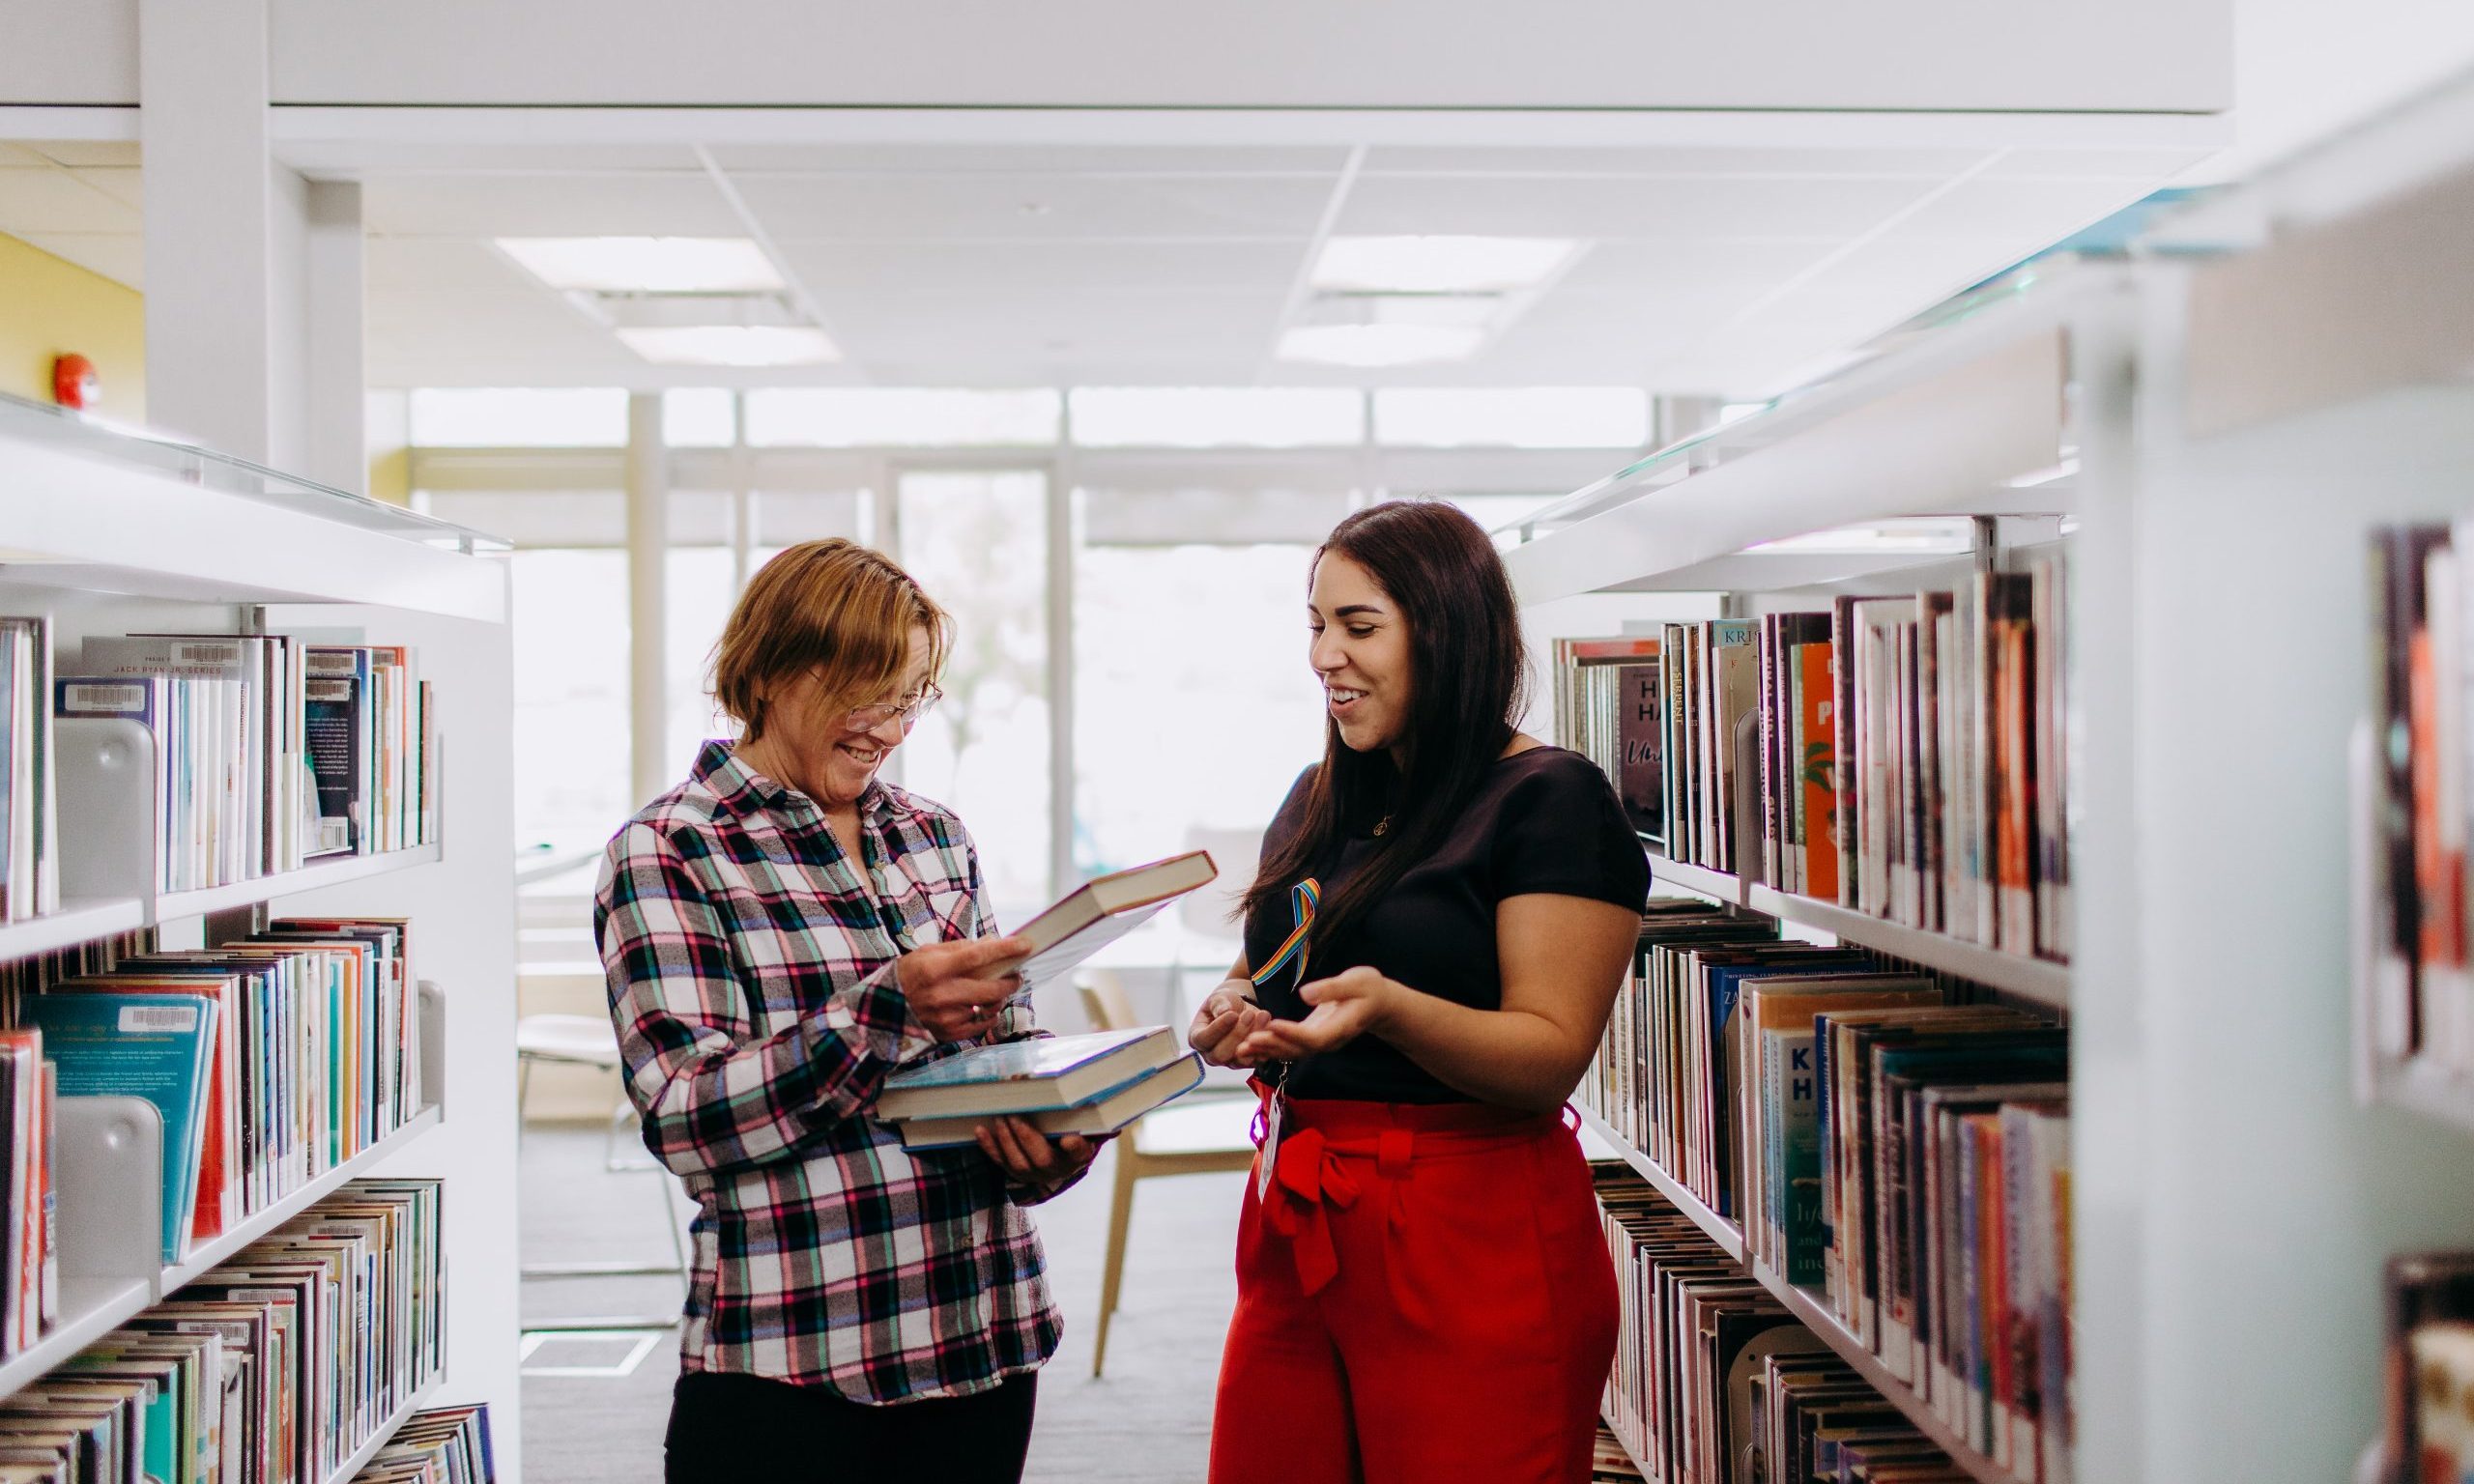 Library staff suggesting books to customer, two women standing in aisle of book shelves